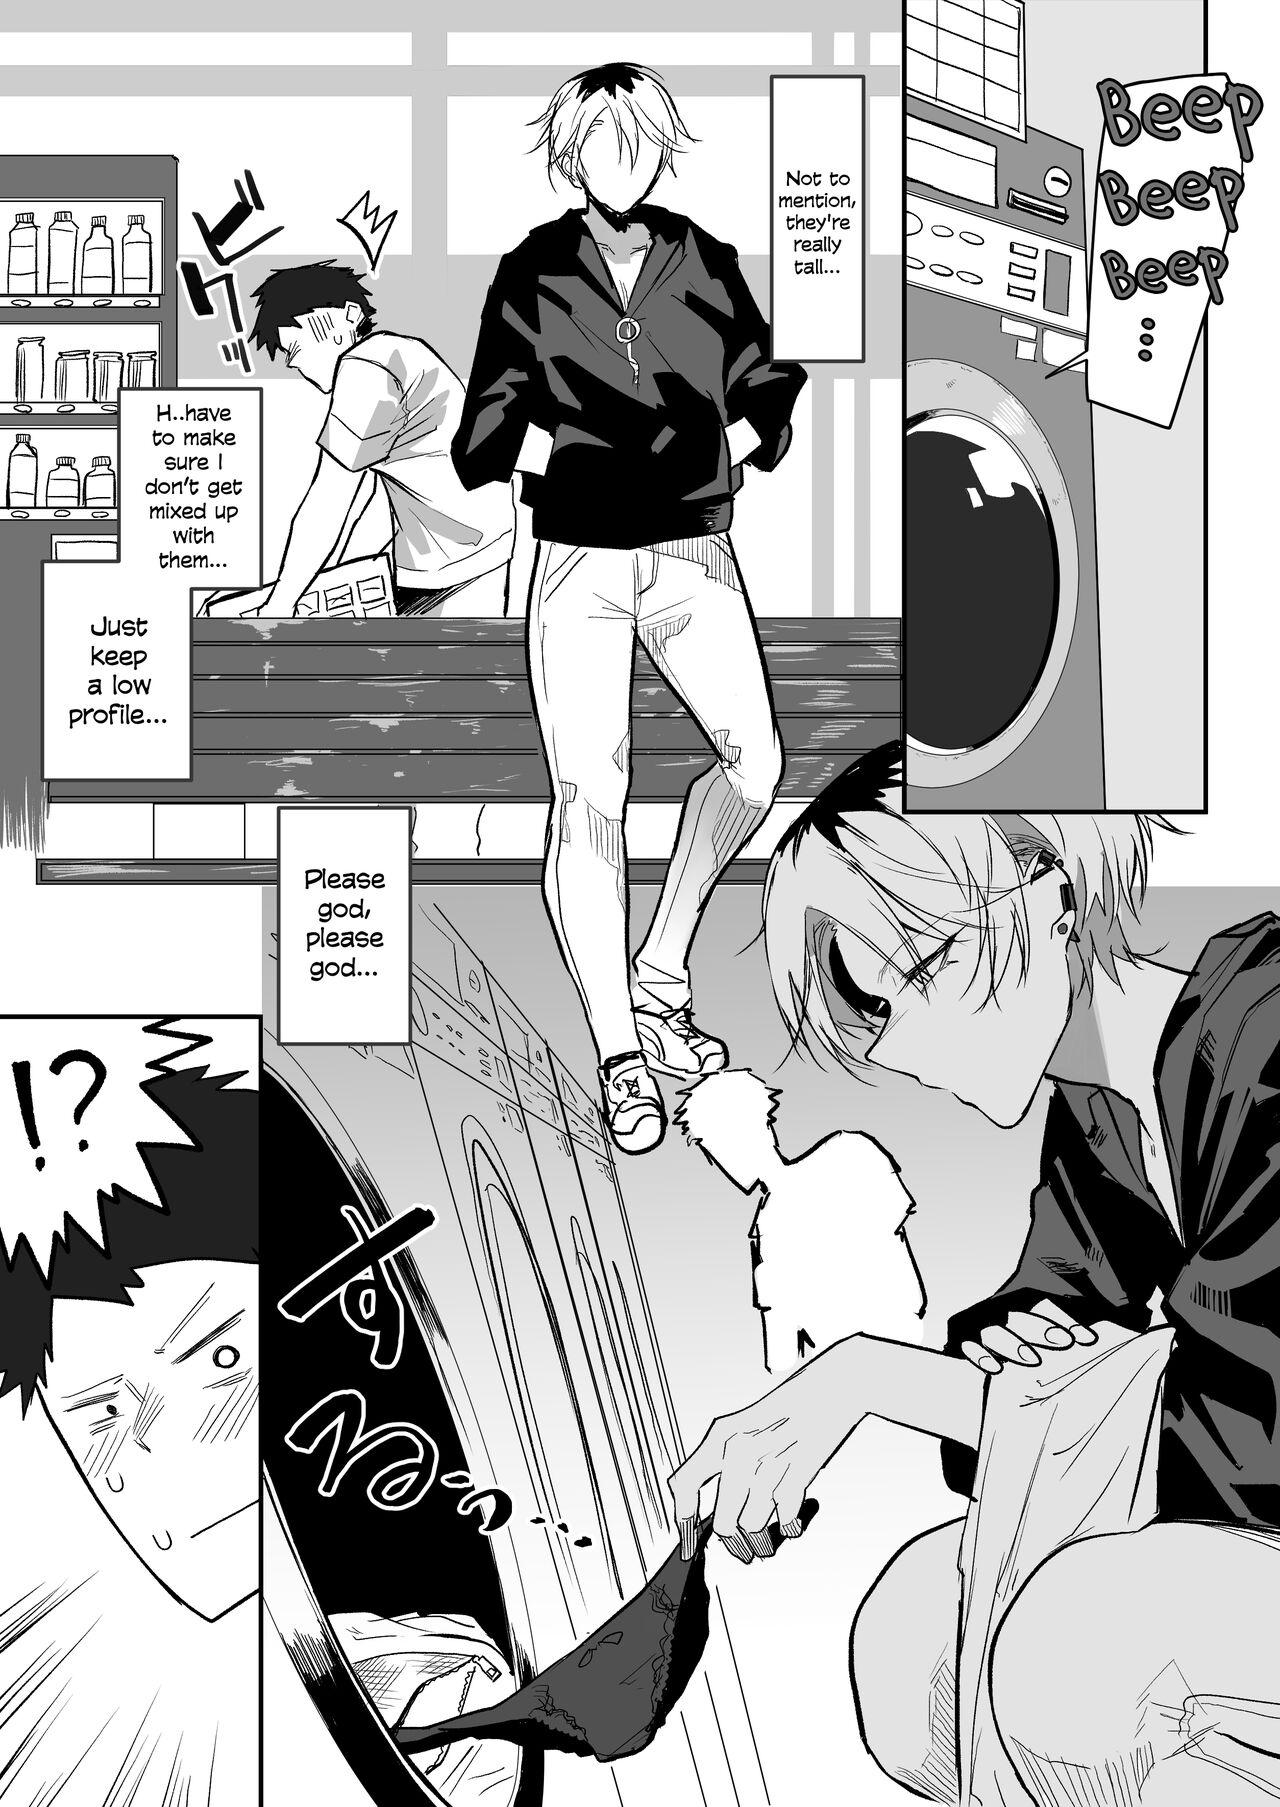 Erotic Coin Laundry de Kowai Yankee ni Karamareru Manga | A Manga About Getting Mixed Up With A Scary Delinquent At The Laundromat - Original Gorda - Page 2